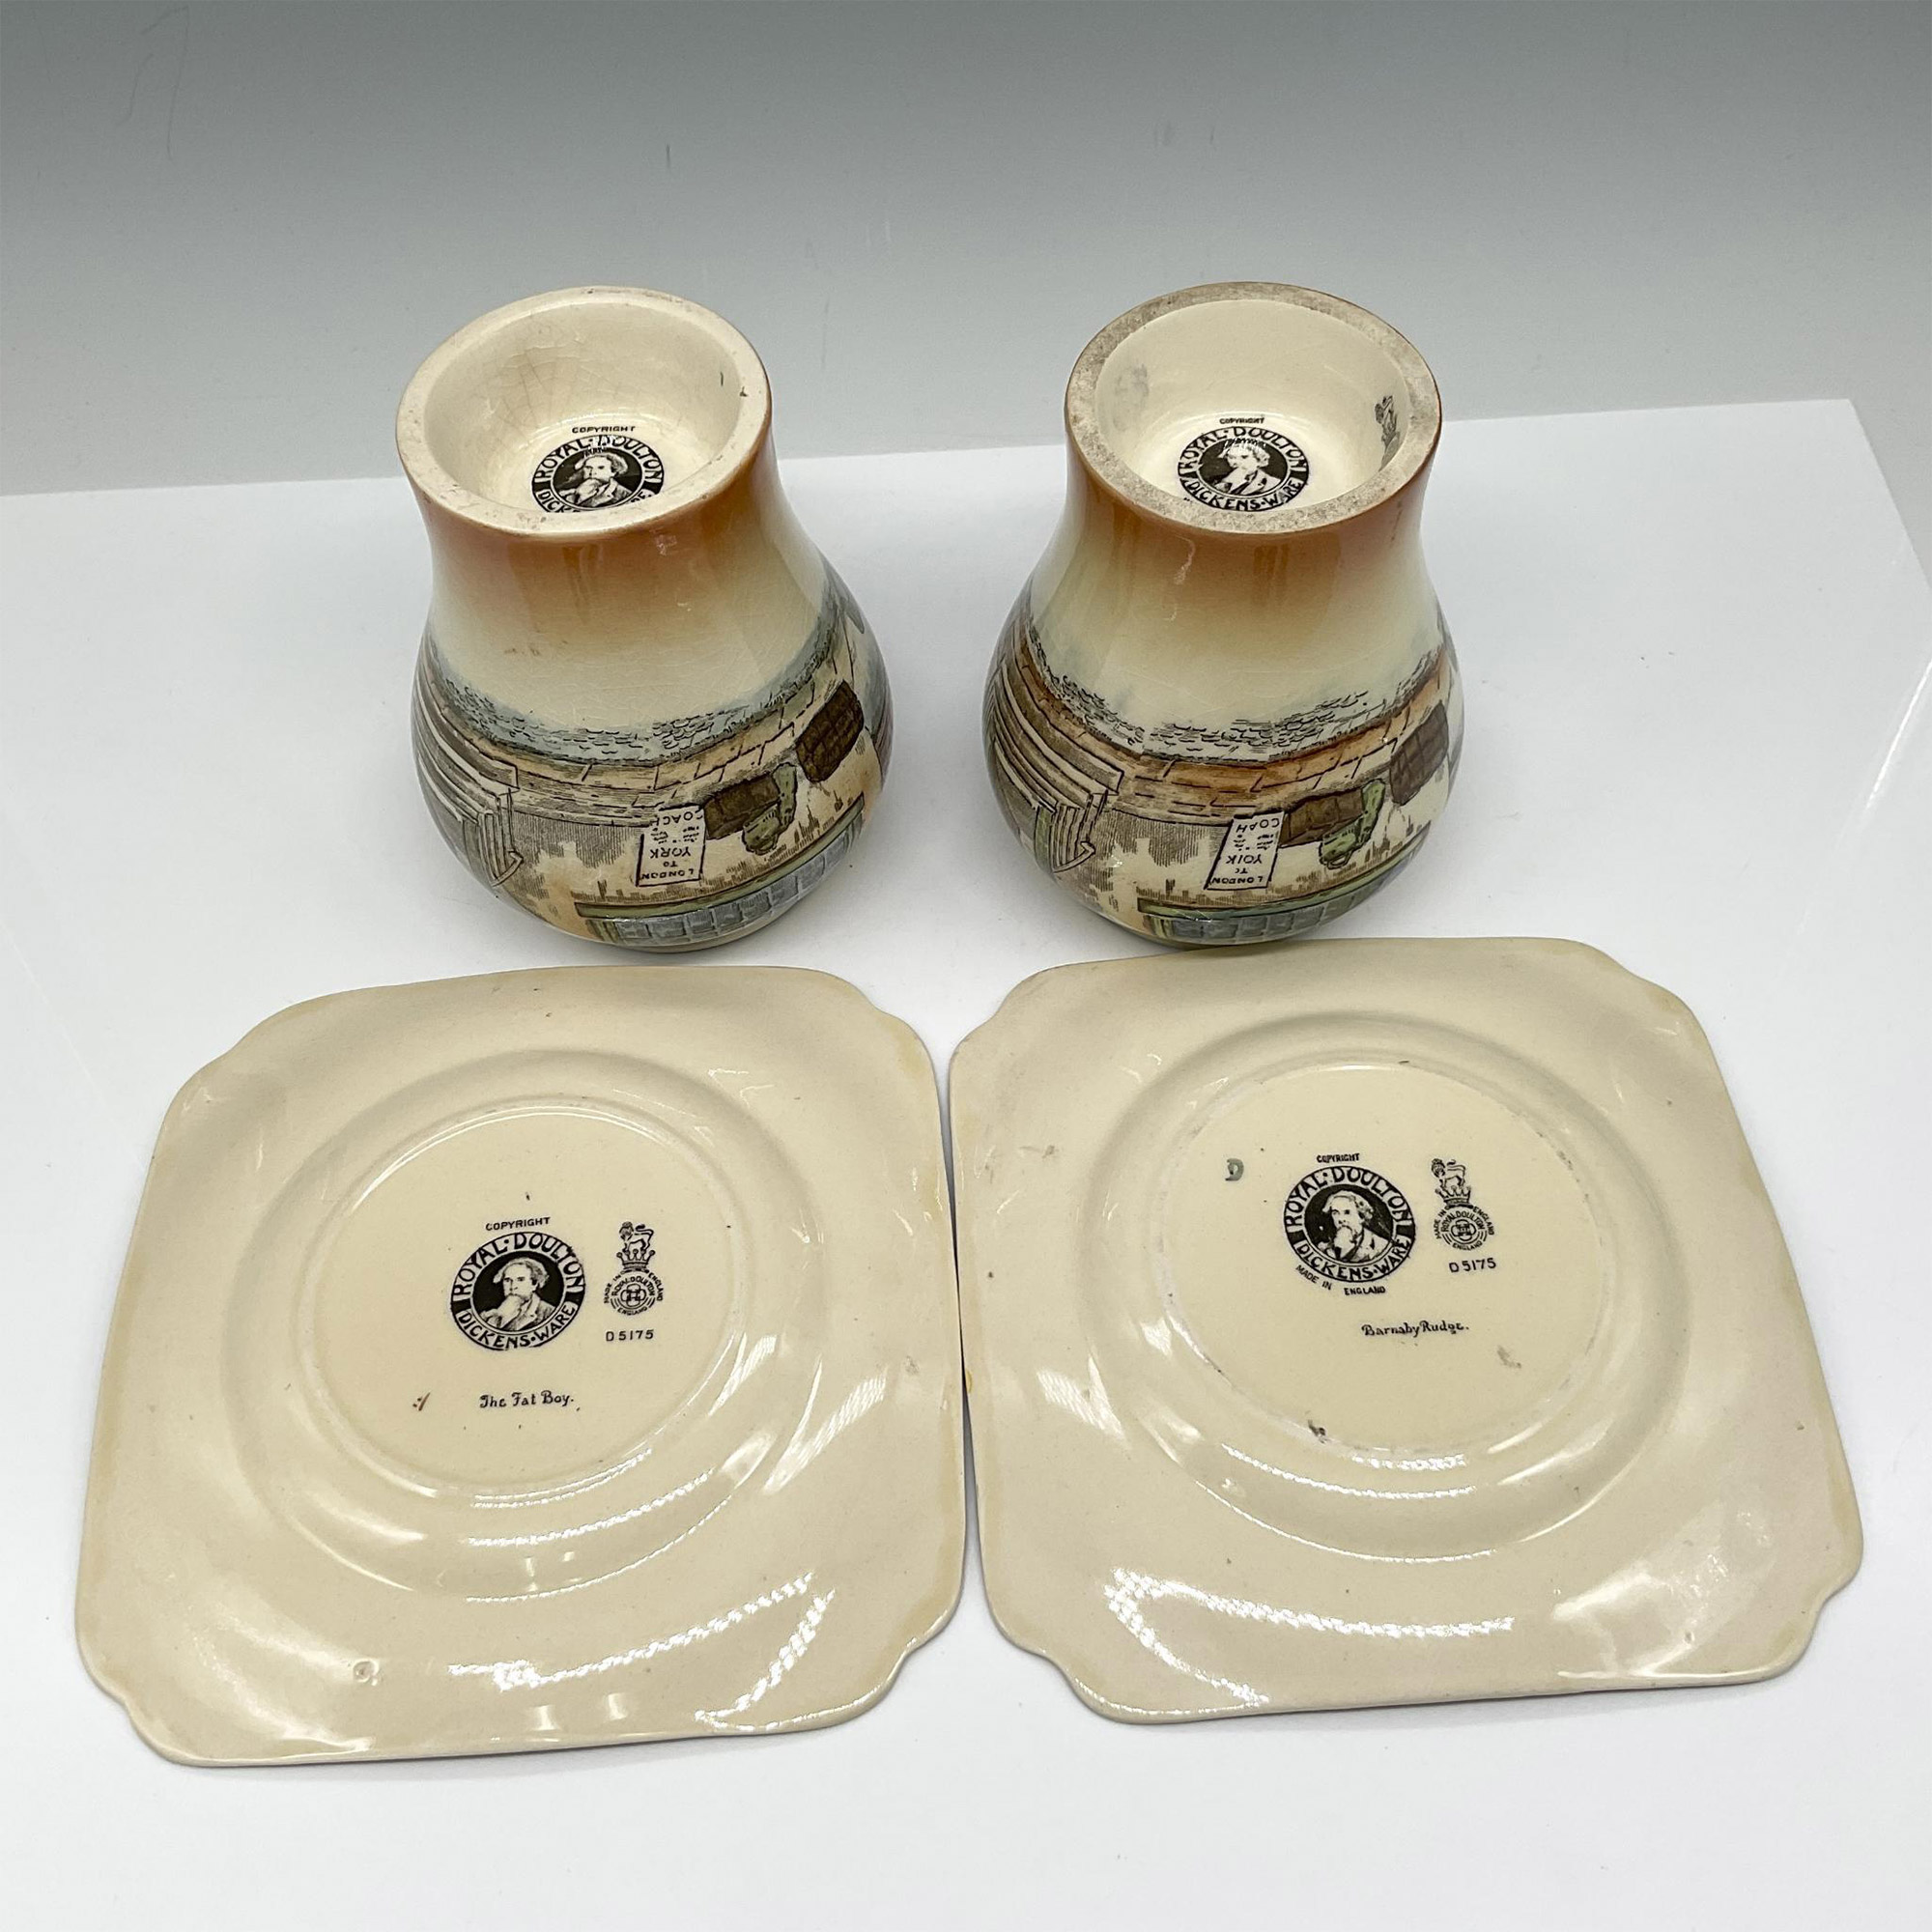 4pc Royal Doulton Dickens Ware Vases & Plates - Image 3 of 3